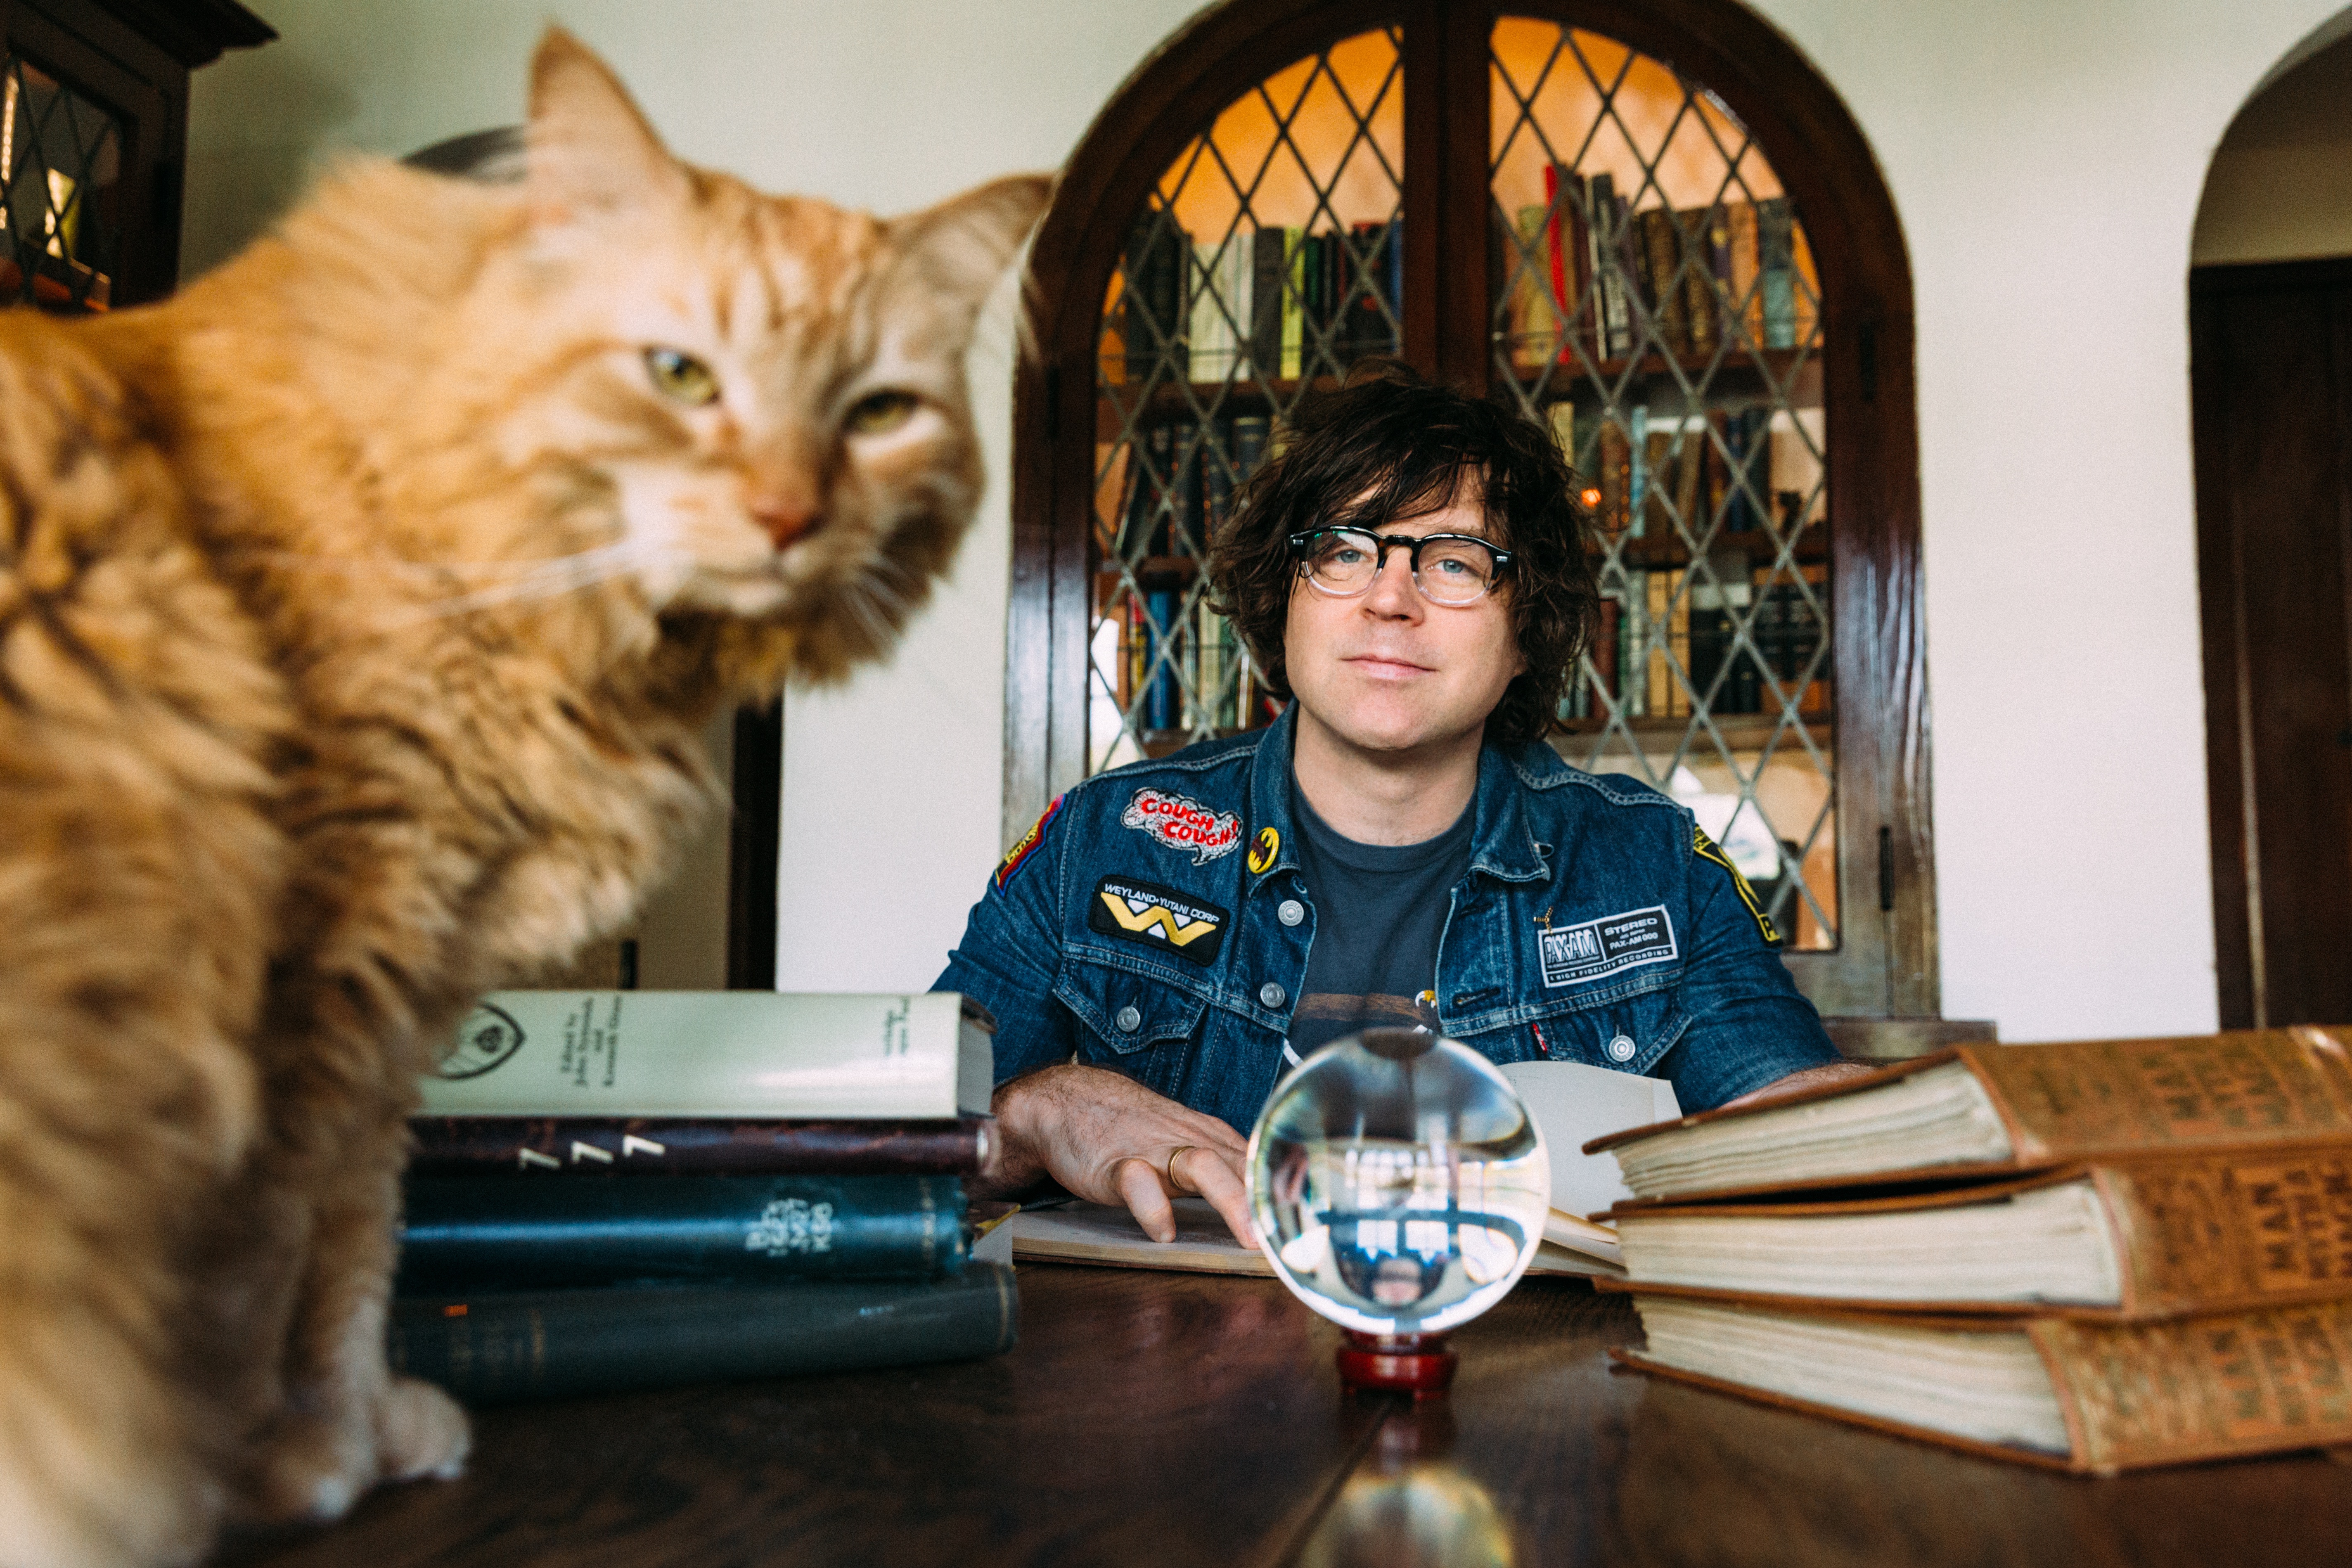 10 things we learned from 20 minutes with Ryan Adams